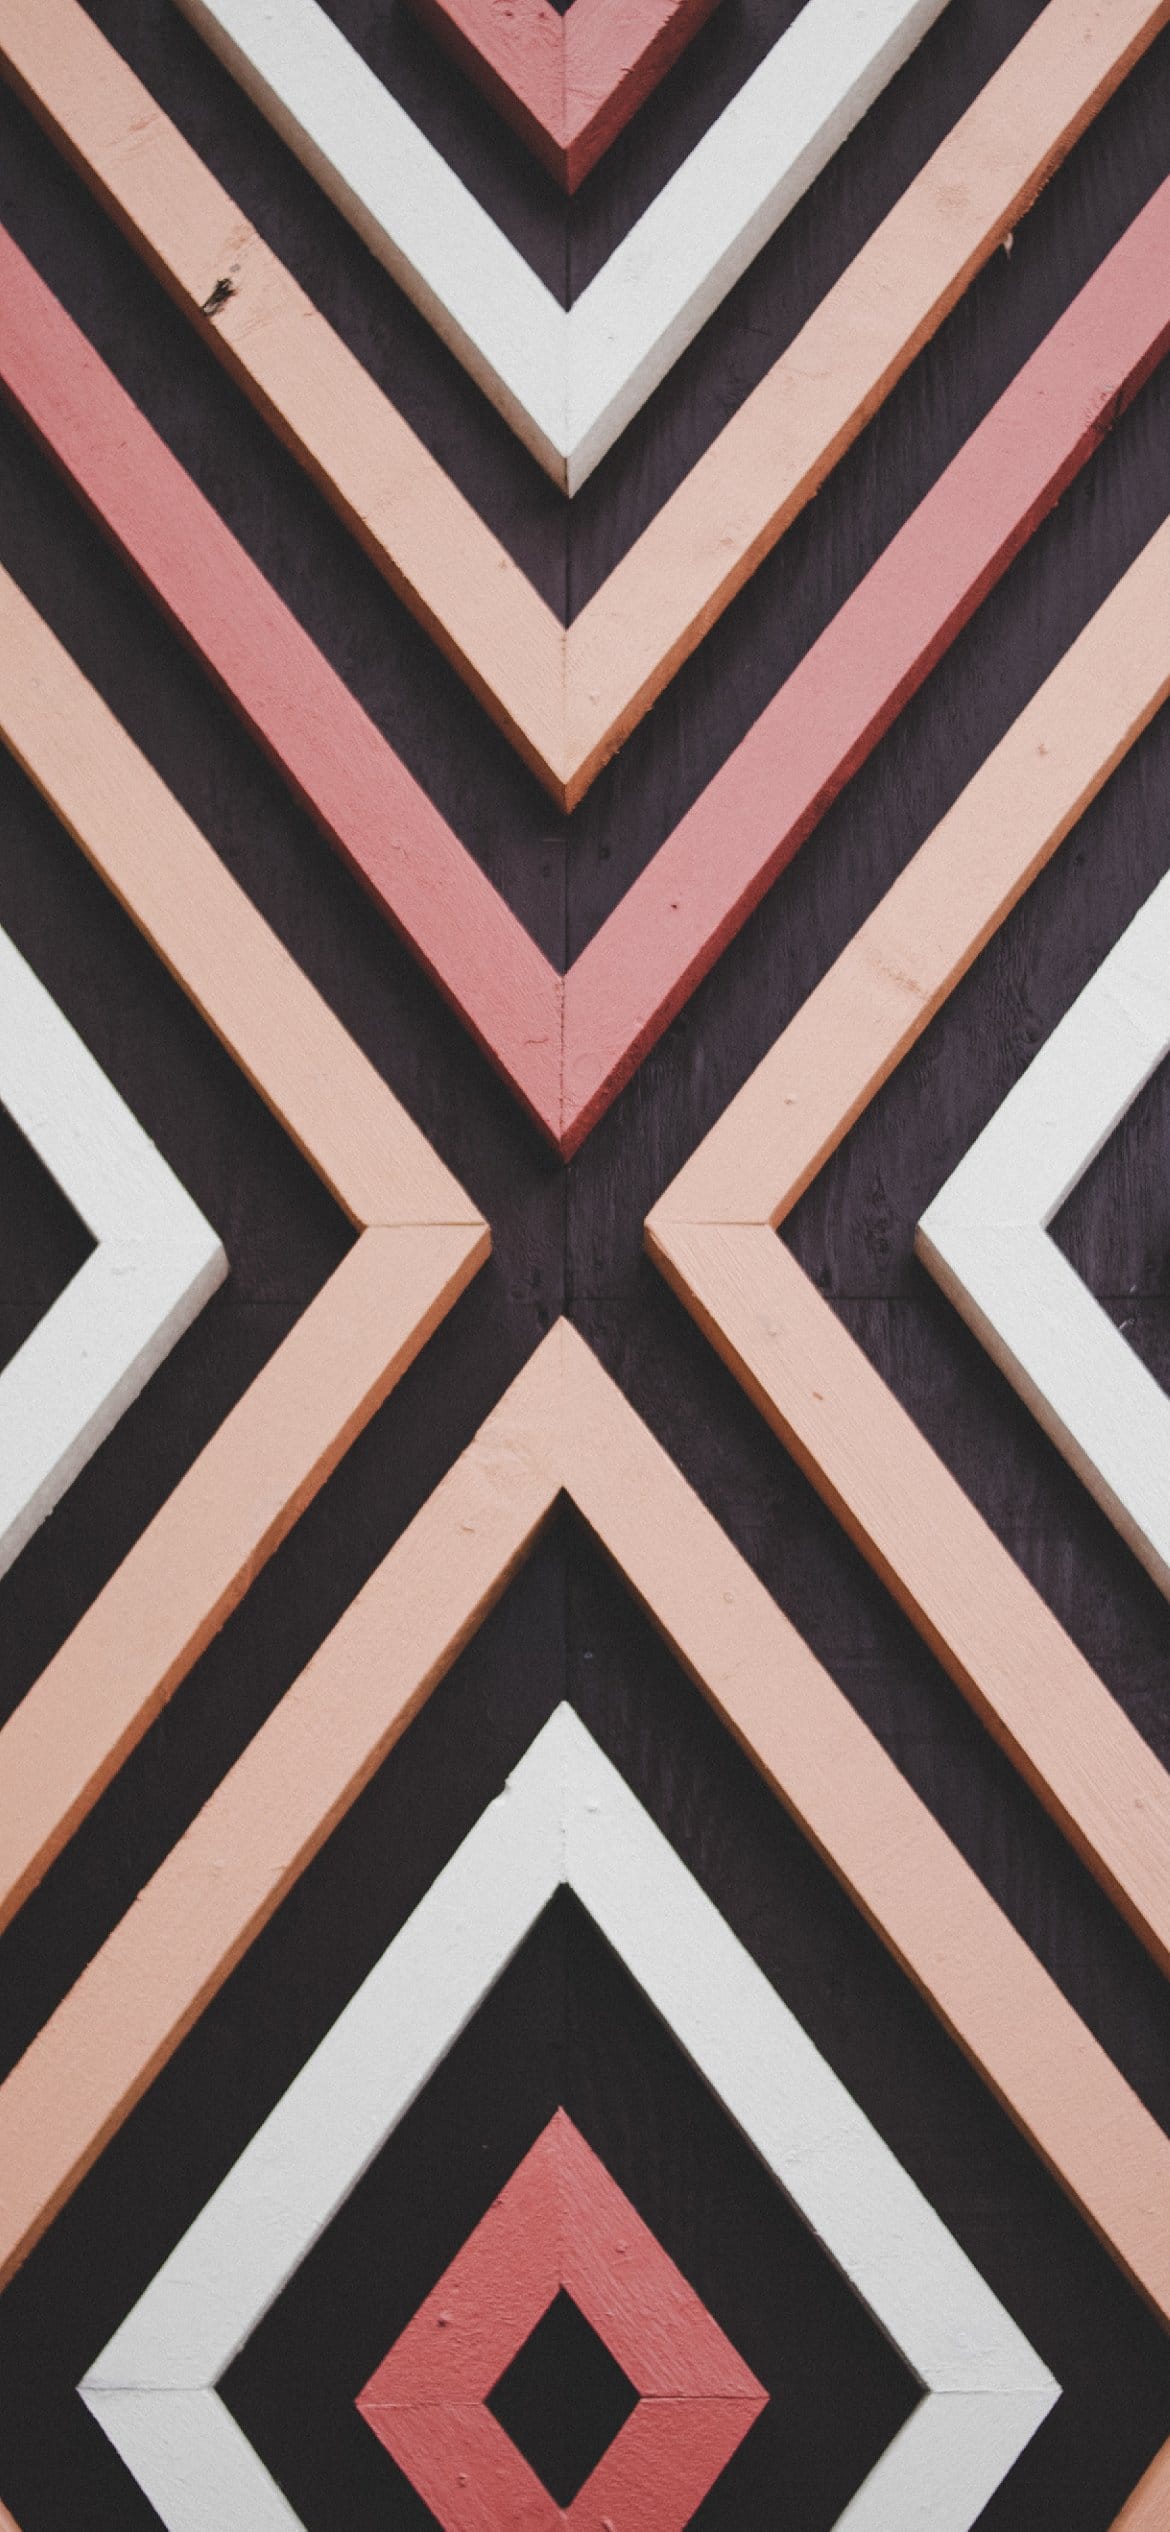 A close up of a wall with black, white, pink, and orange geometric shapes. - Pink phone